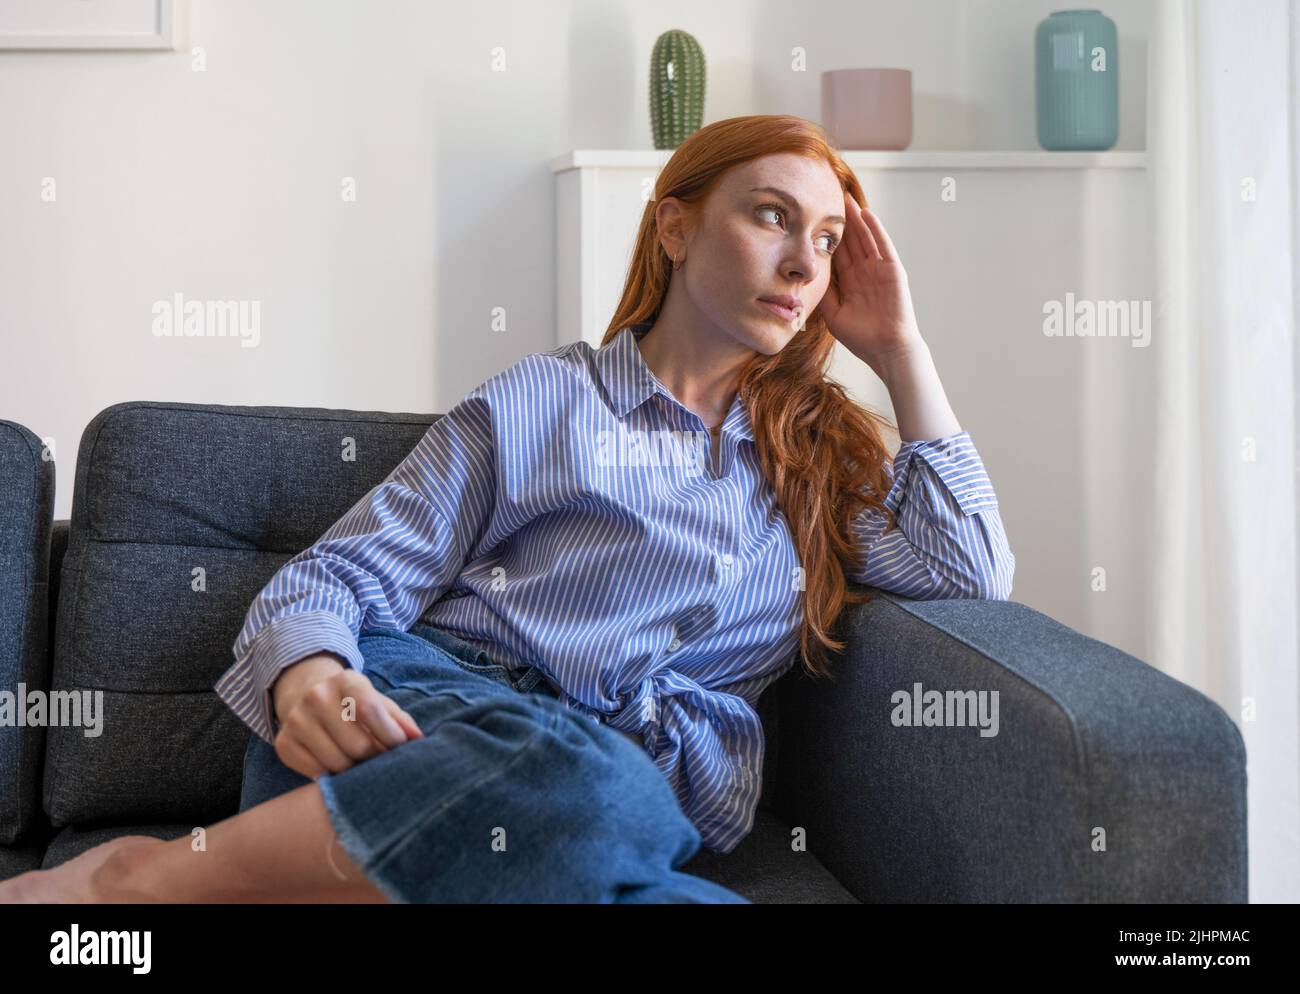 Depressed woman sitting on sofa at home, thinking about life things Stock Photo